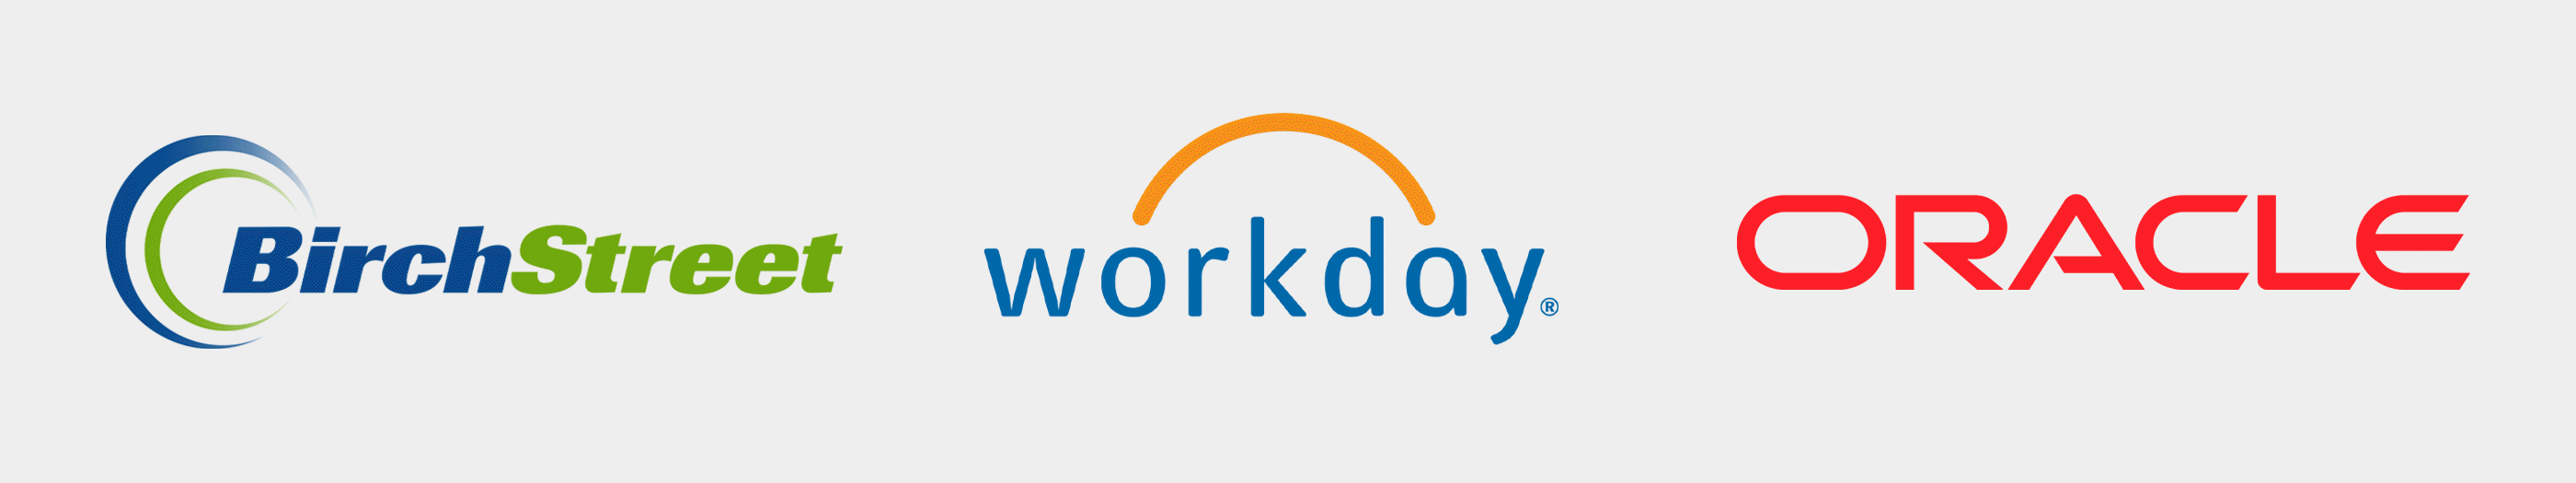 birch street oracle and workday logos rotating